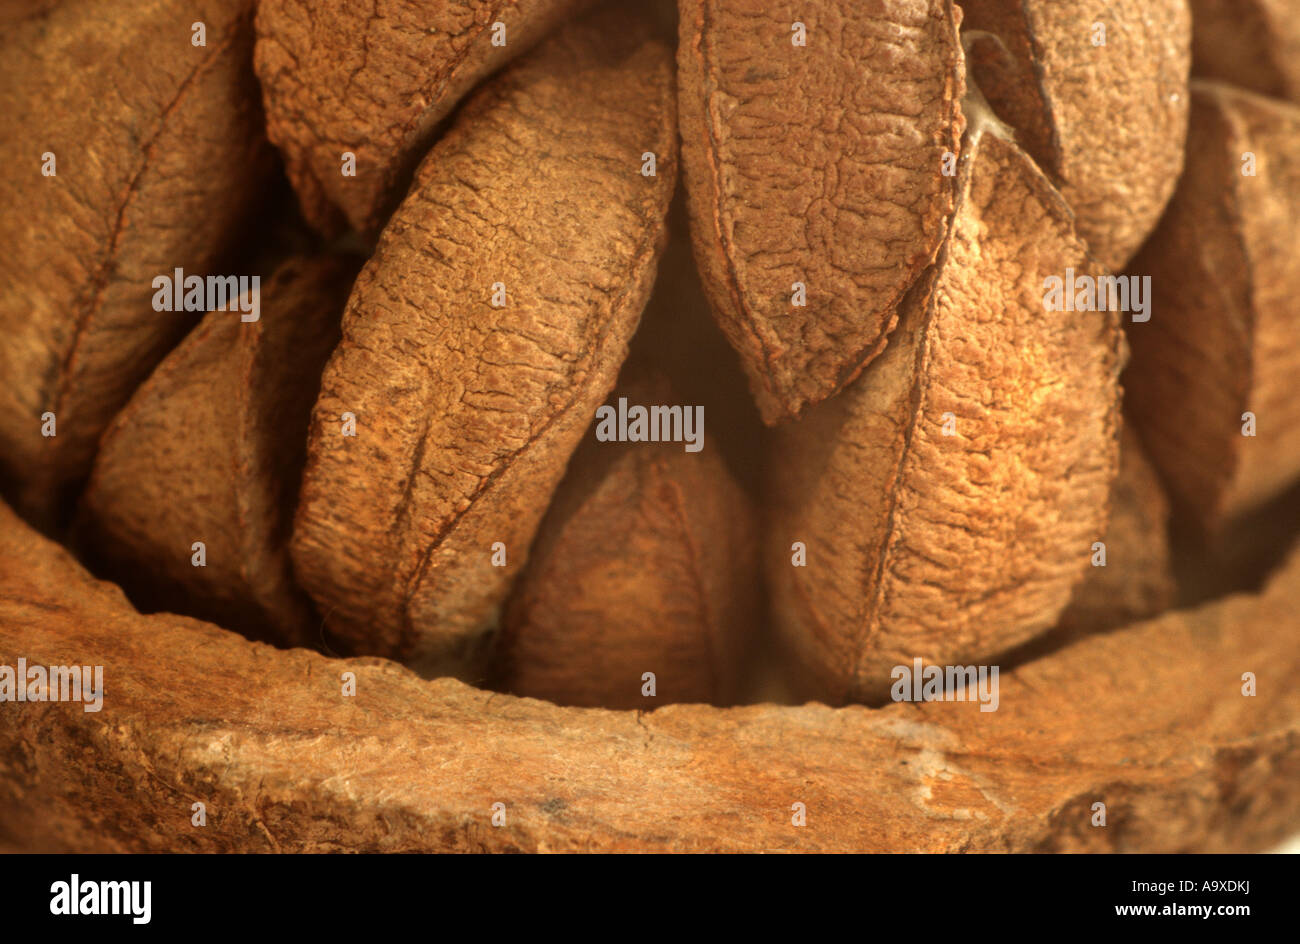 Brazil nut, butter nut, cream nut, para nut (Bertholletia excelsa), capsule with fruits Stock Photo